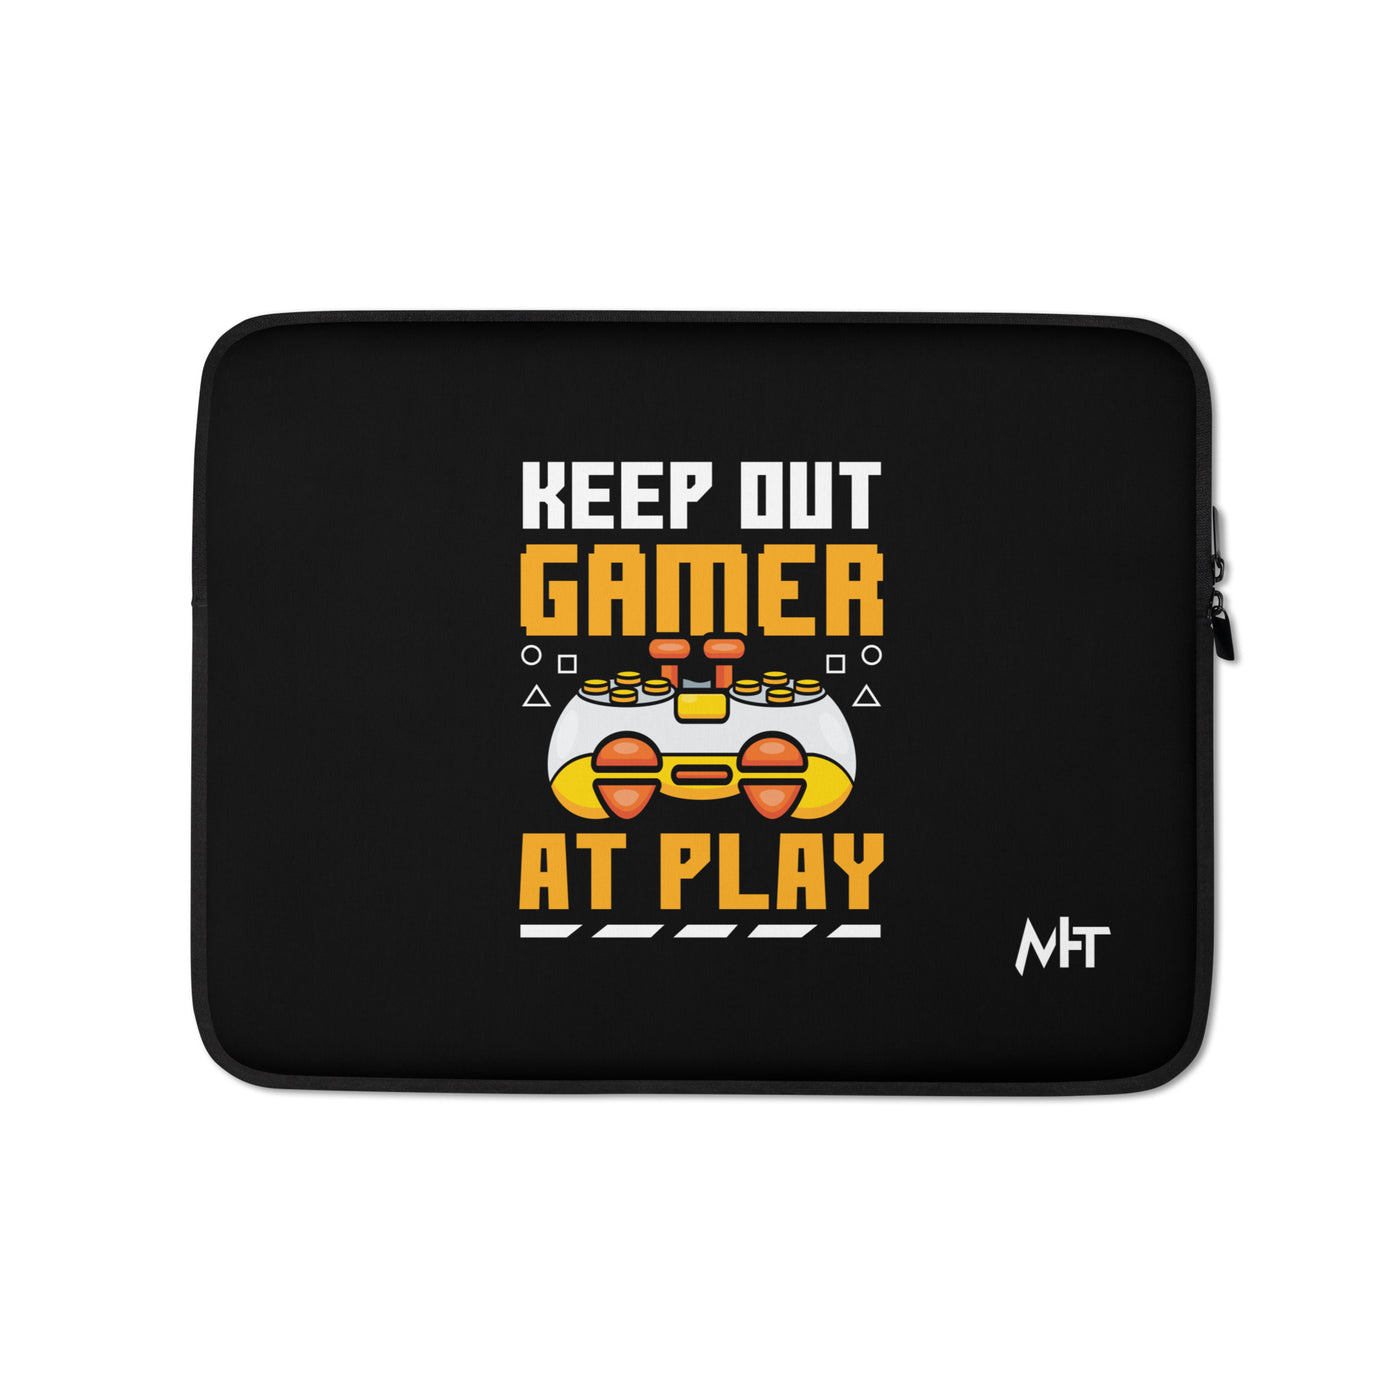 Keep Out Gamer At Play Rima 7 - Laptop Sleeve